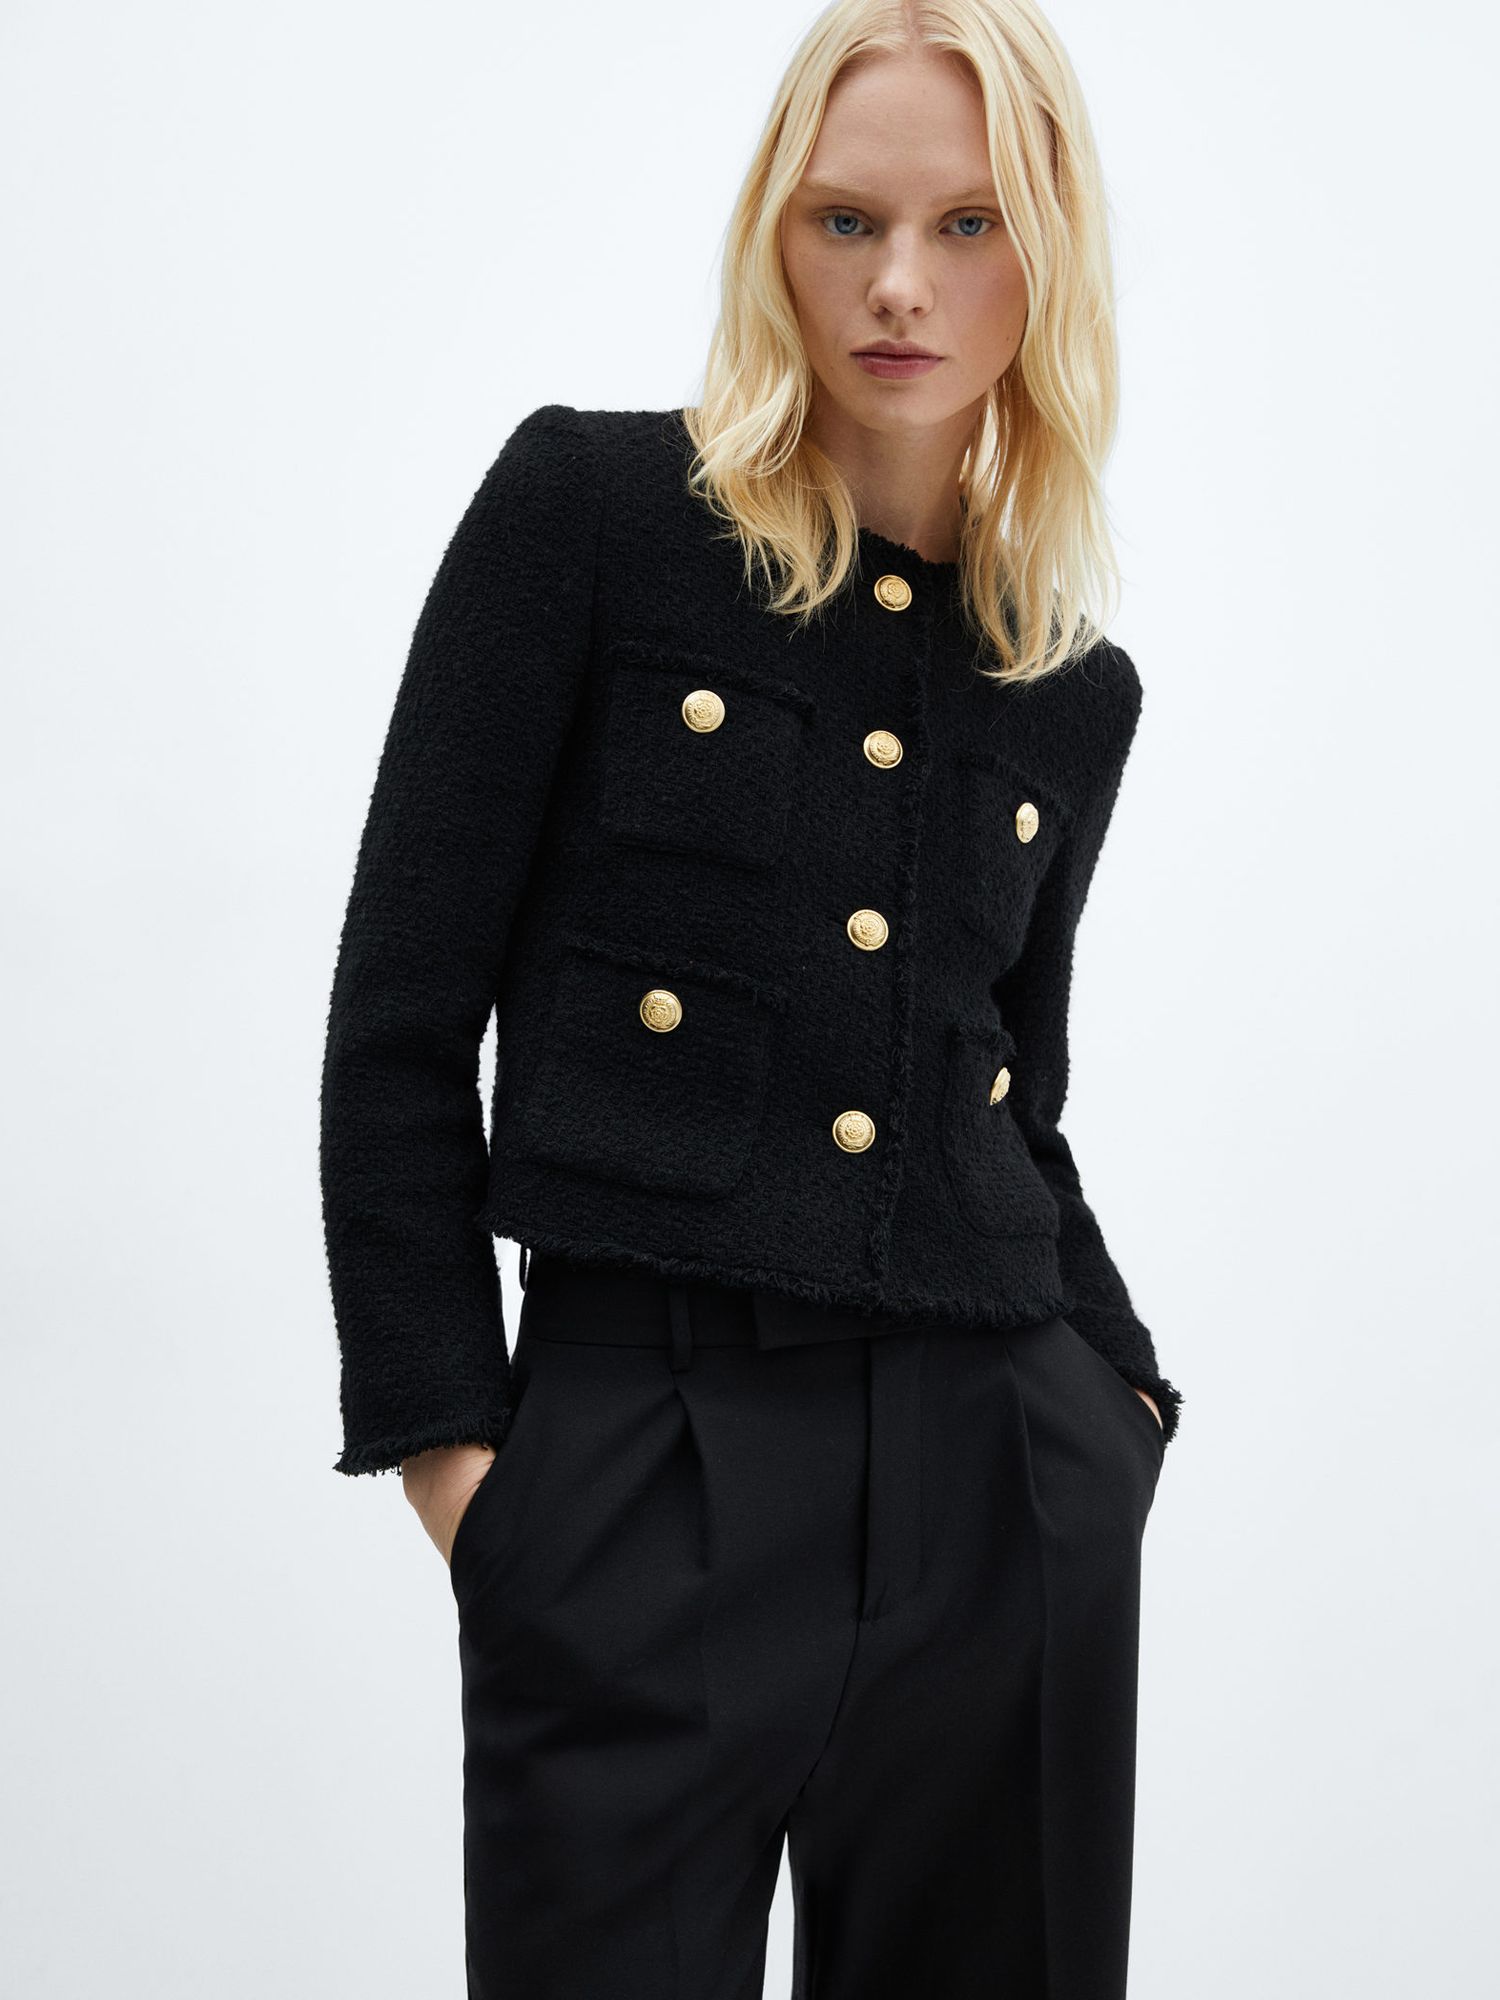 Embroidered Cropped Jacket with Organic Cotton Black, Casualwear